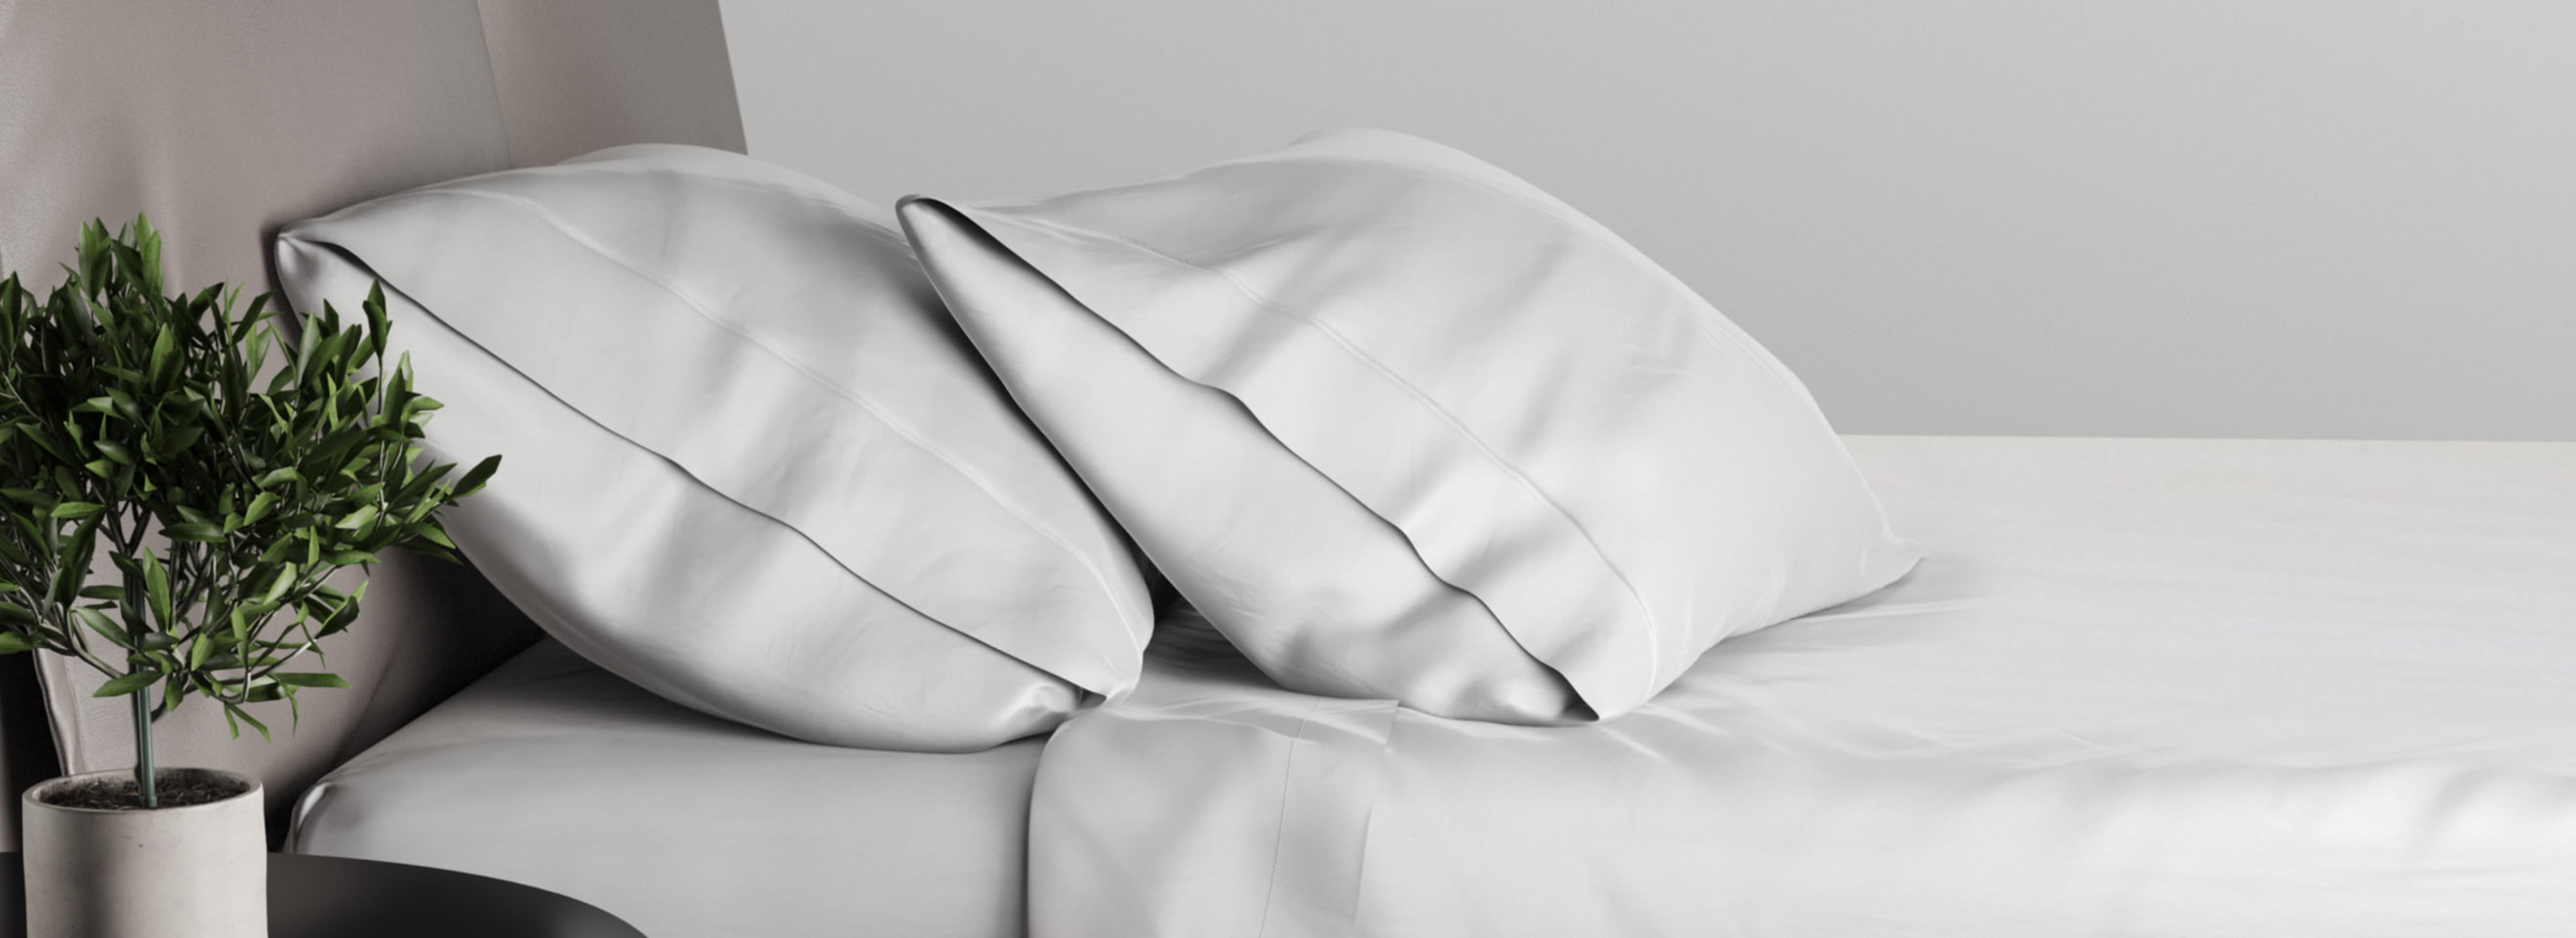 Bed Sheet Sizes and Dimensions Guide - Amerisleep